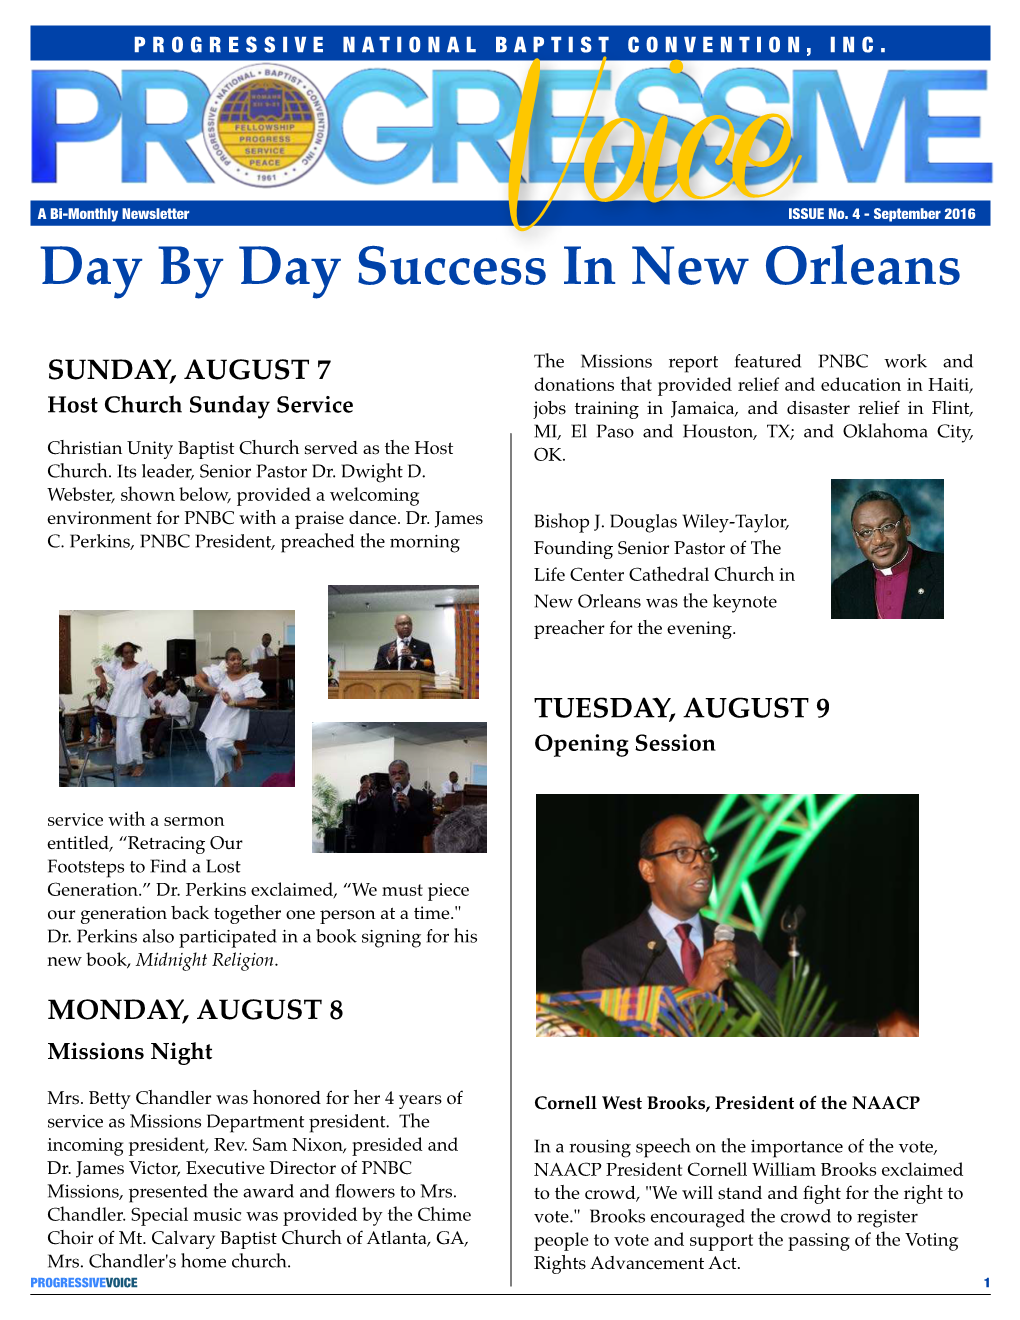 September 2016 Day by Day Success in New Orleans